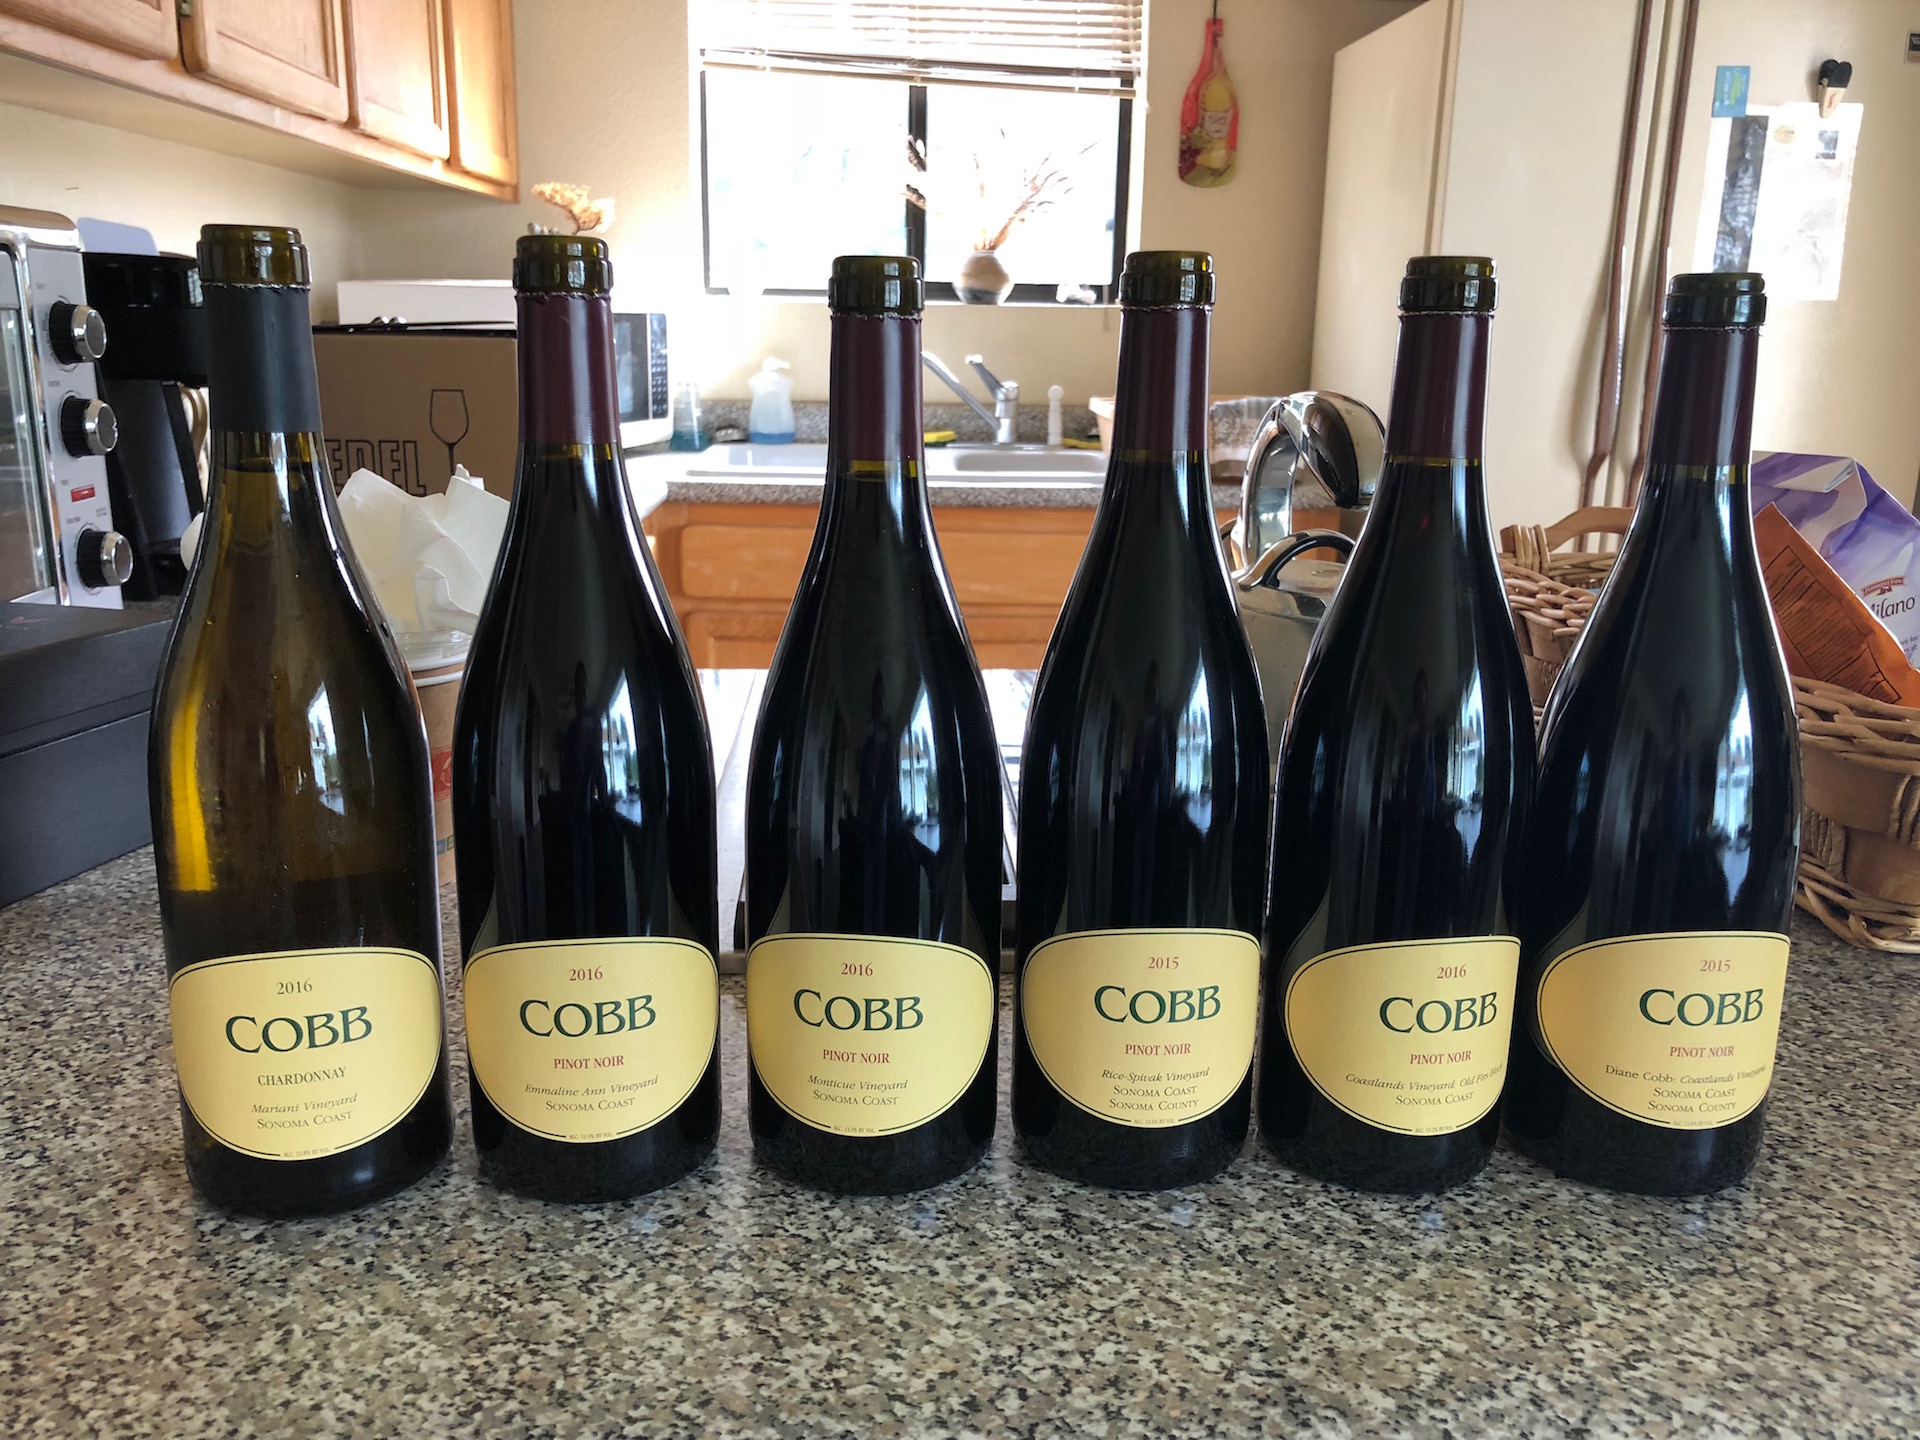 A variety of Cobb Wines Chardonnay and Pinot Noir